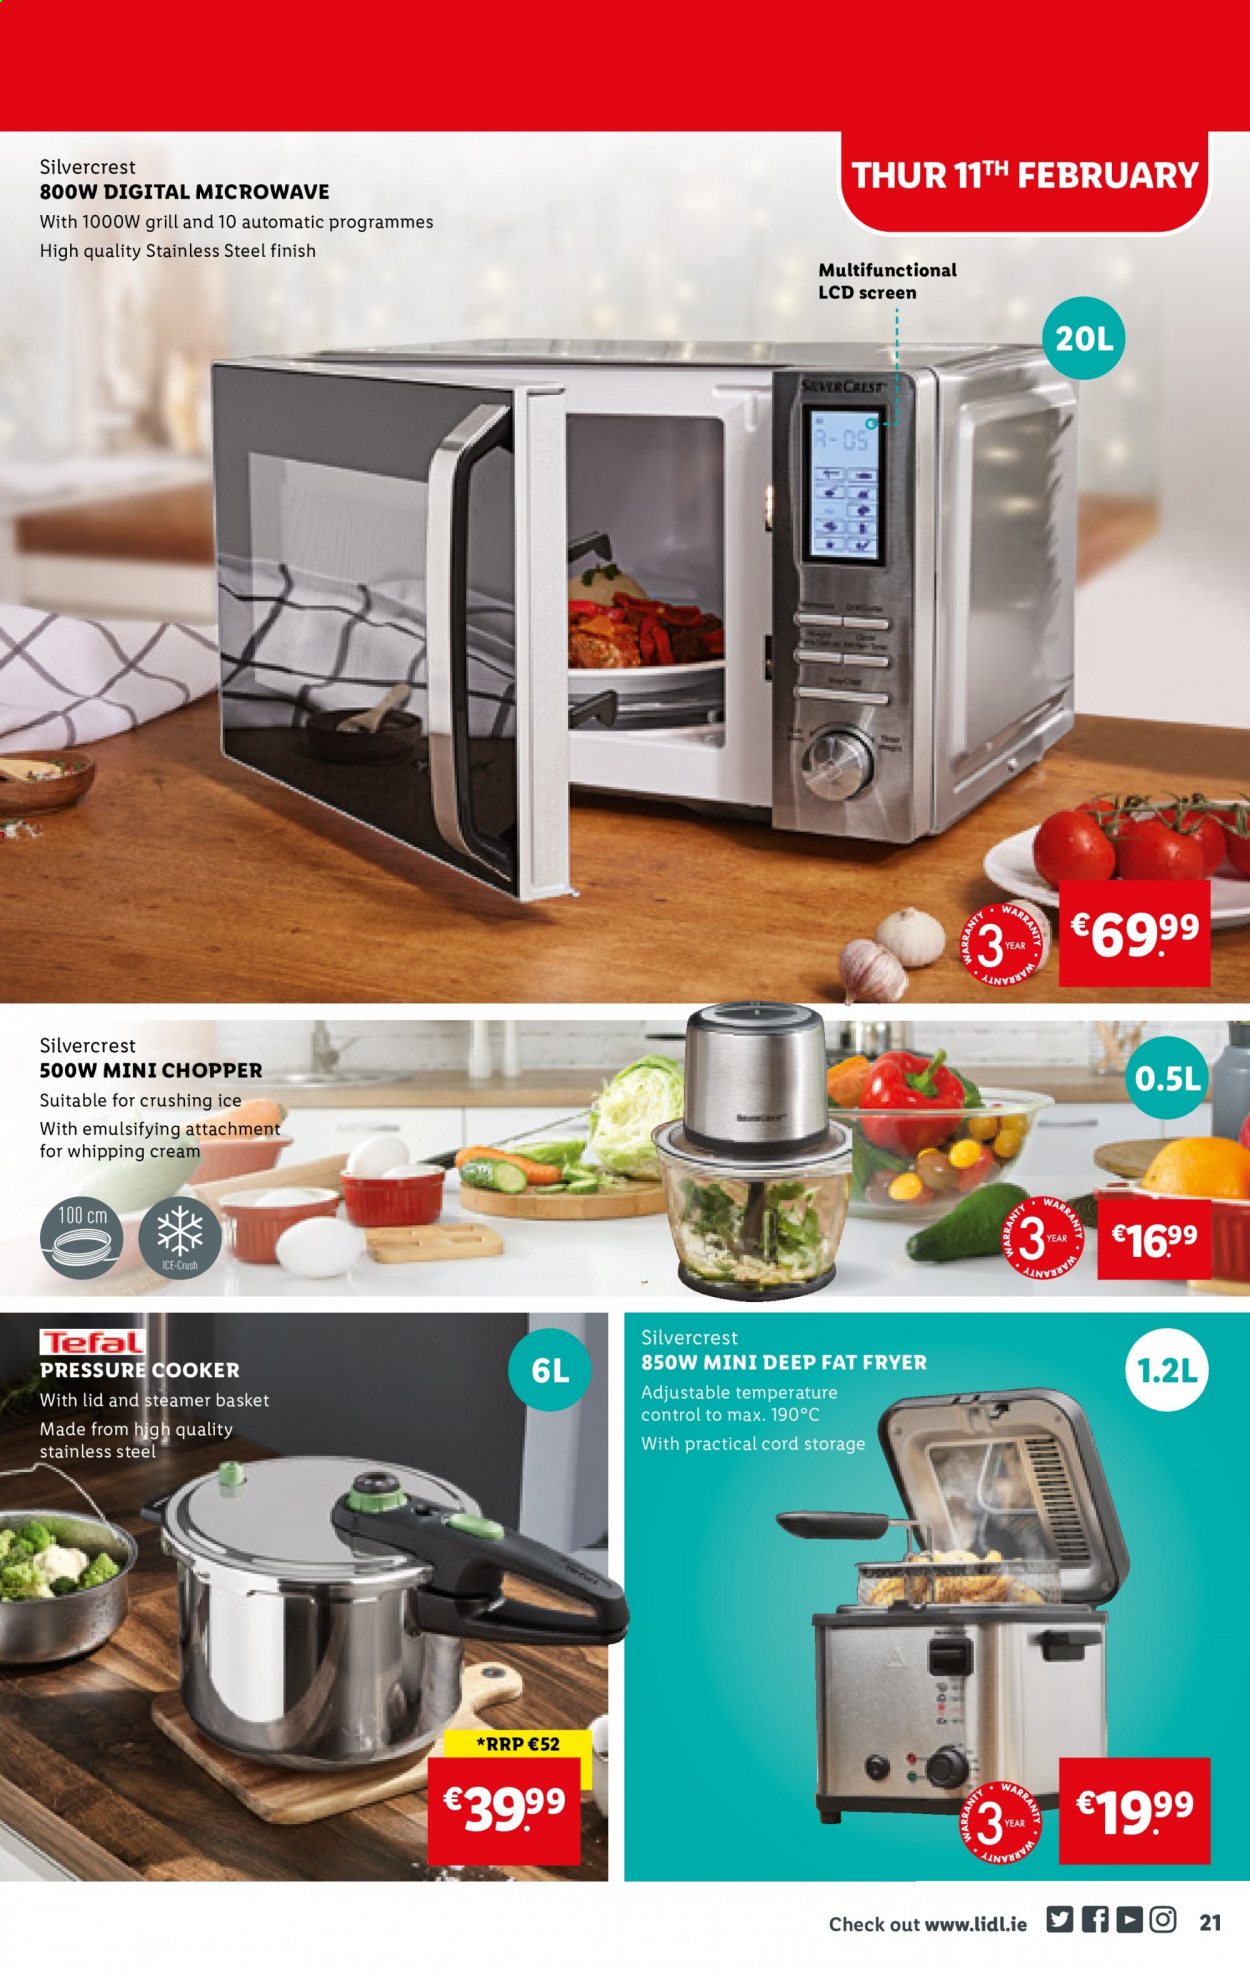 thumbnail - Lidl offer  - 11.02.2021 - 17.02.2021 - Sales products - SilverCrest, Tefal, pressure cooker, handy chopper, mini chopper, microwave, deep fryer, food steamer. Page 21.